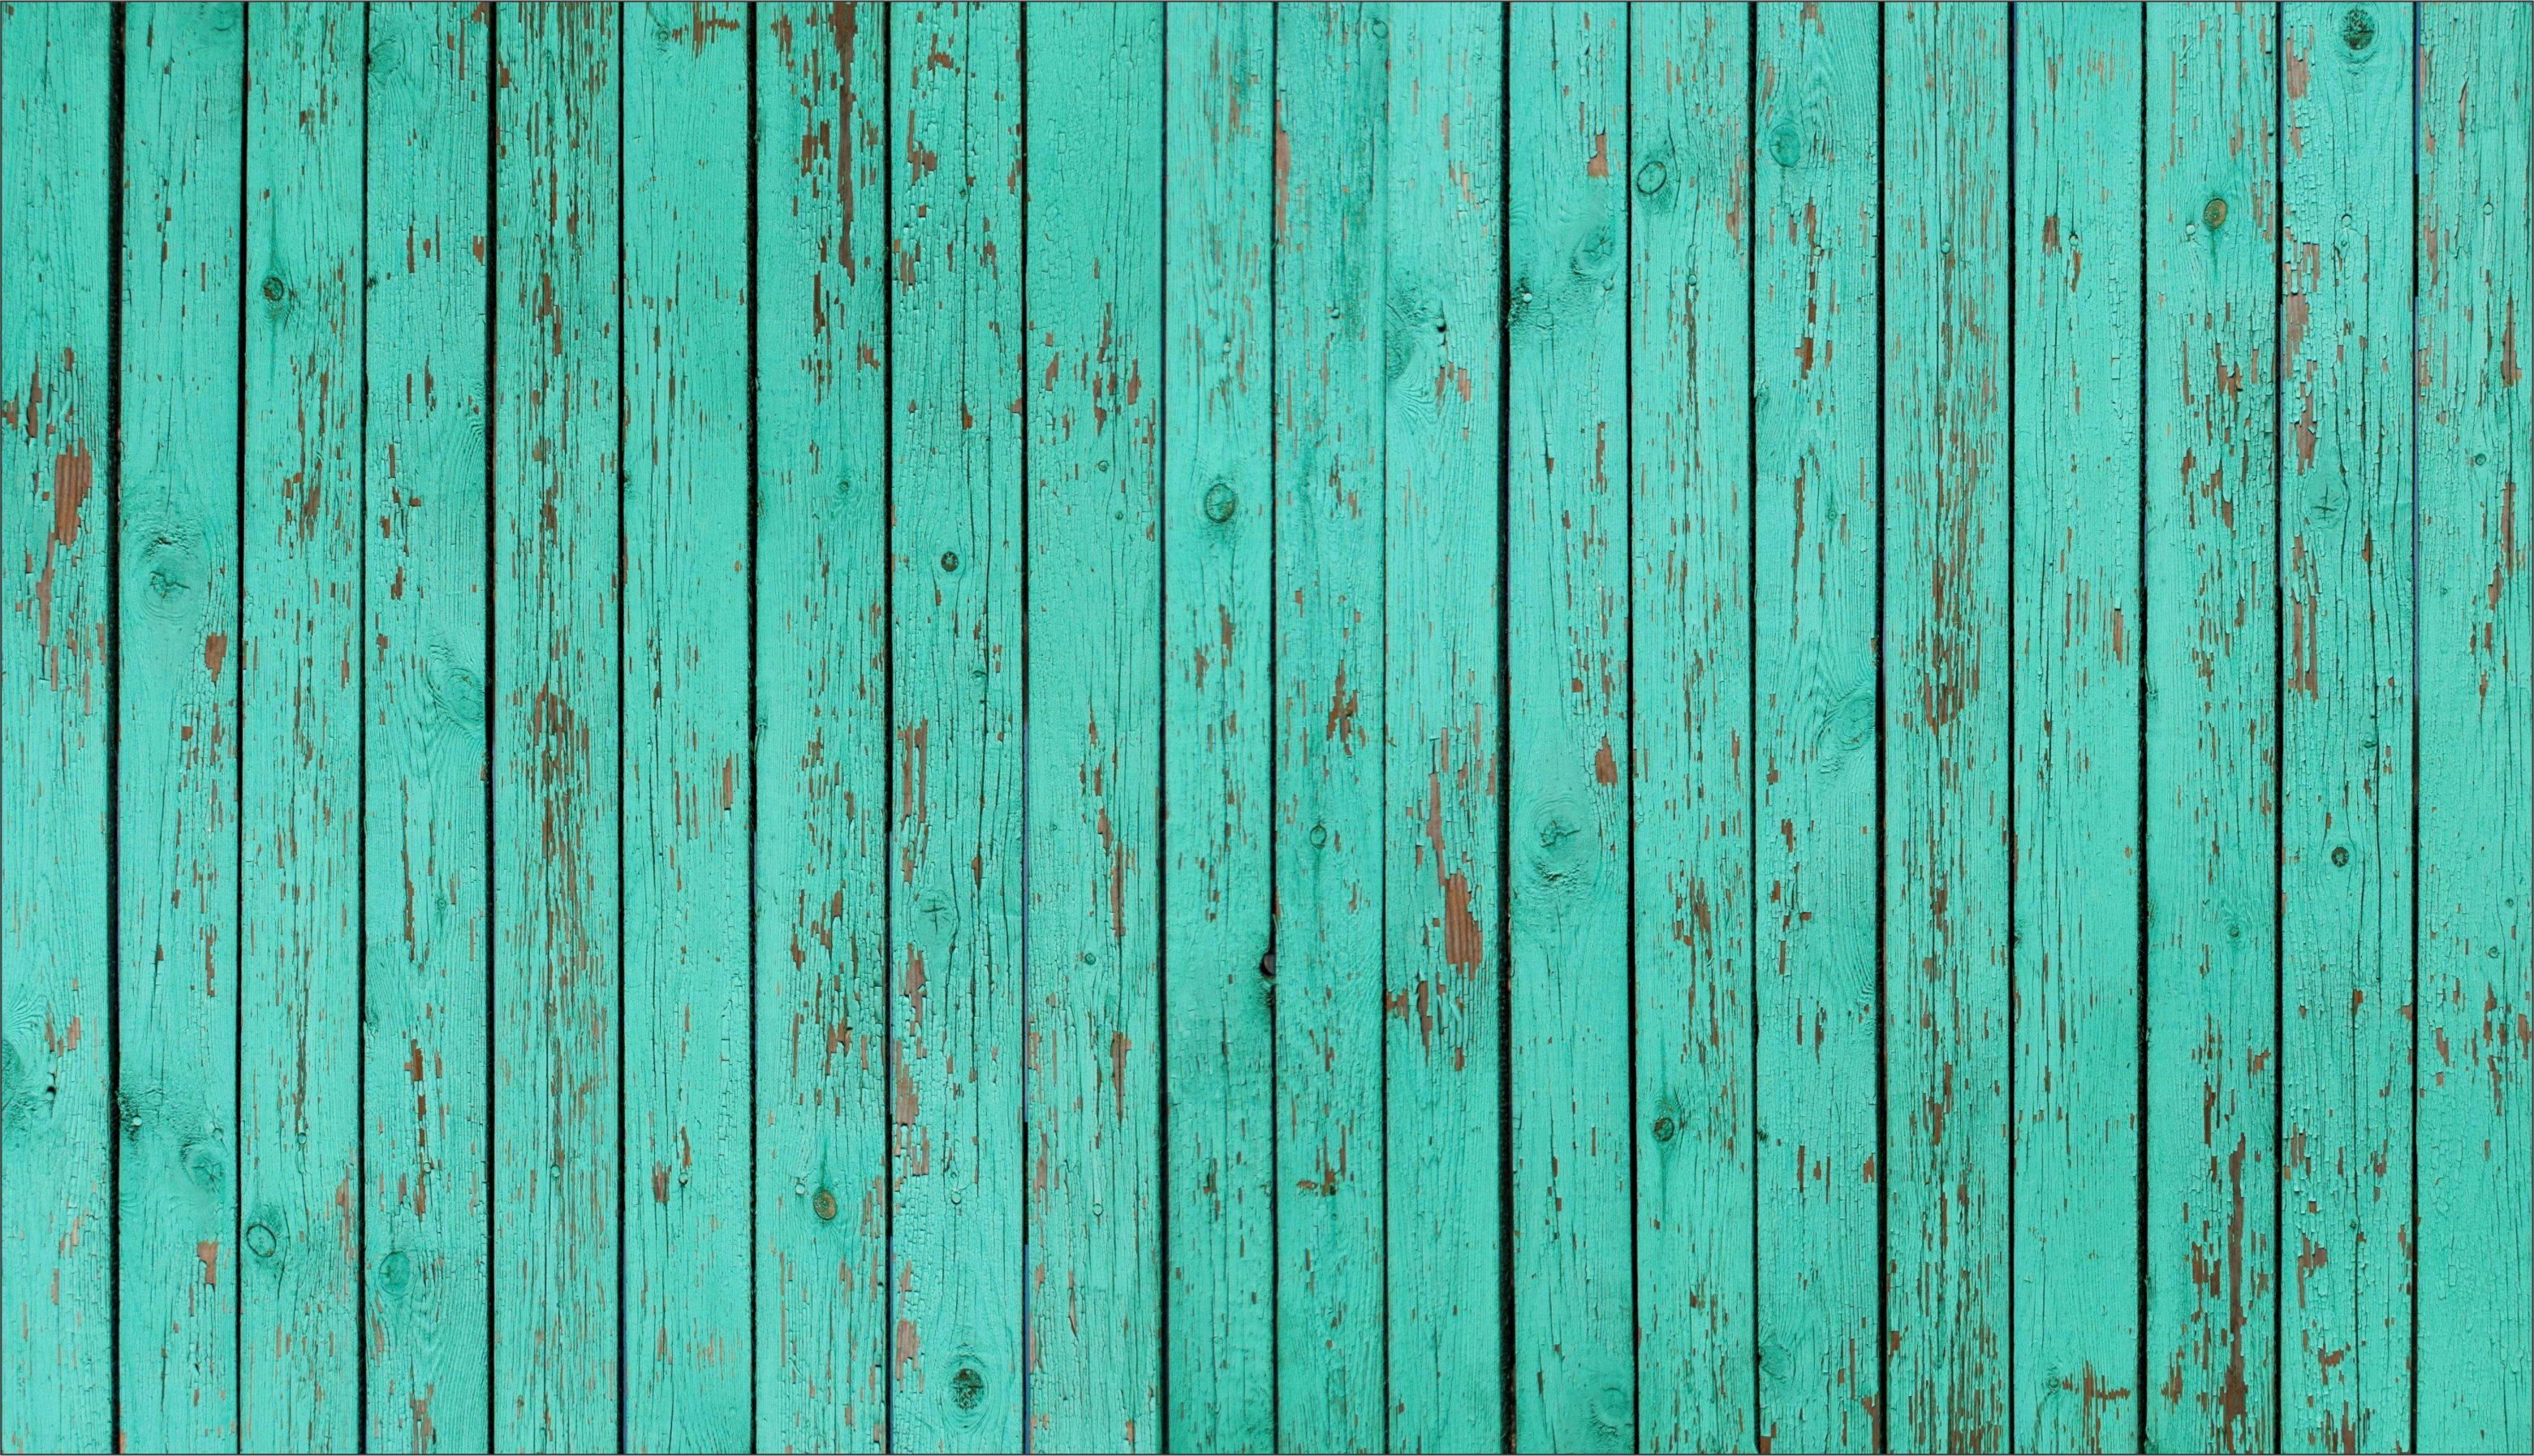 vintage wood background tumblr. Background Check All